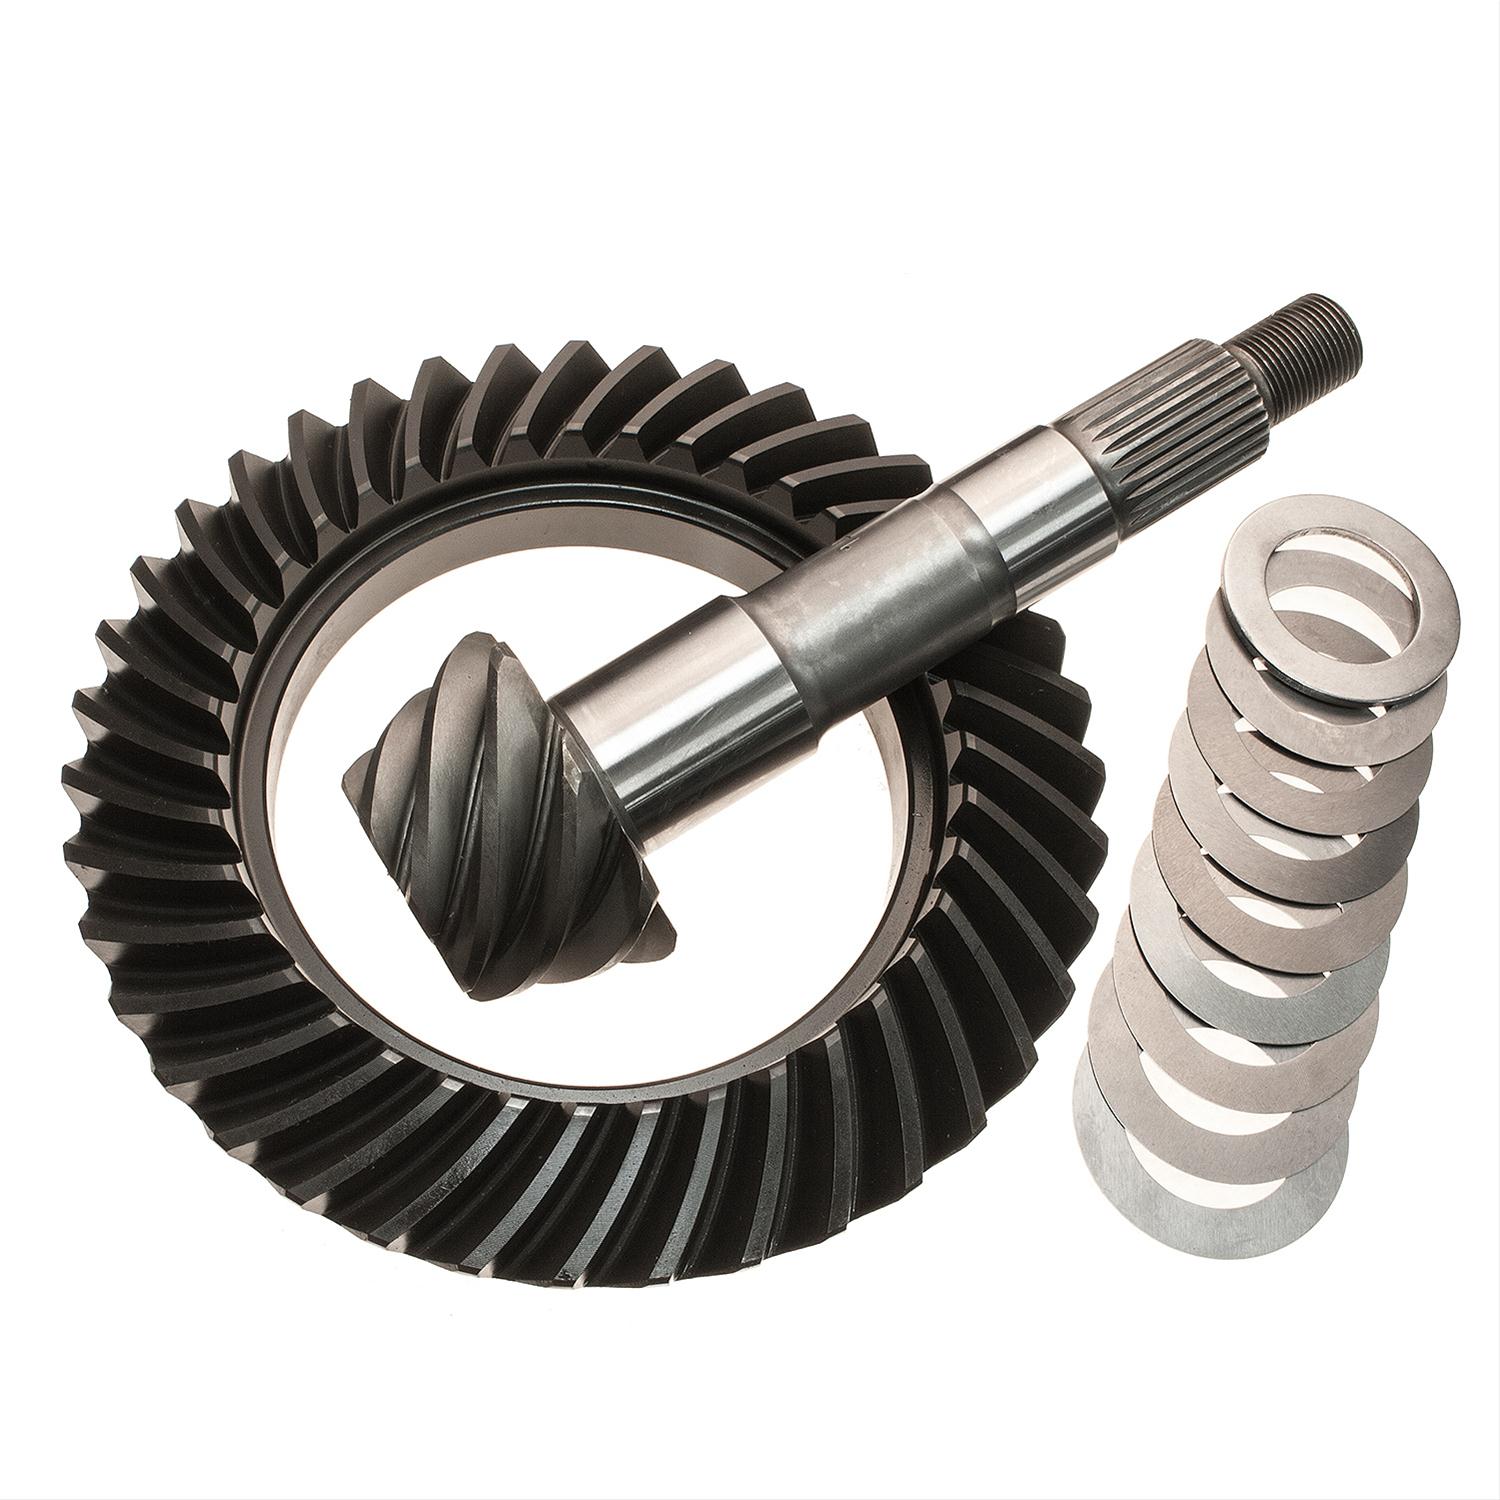 USA Standard Ring /& Pinion Gear Set for Toyota V6 in a 5.29 Ratio